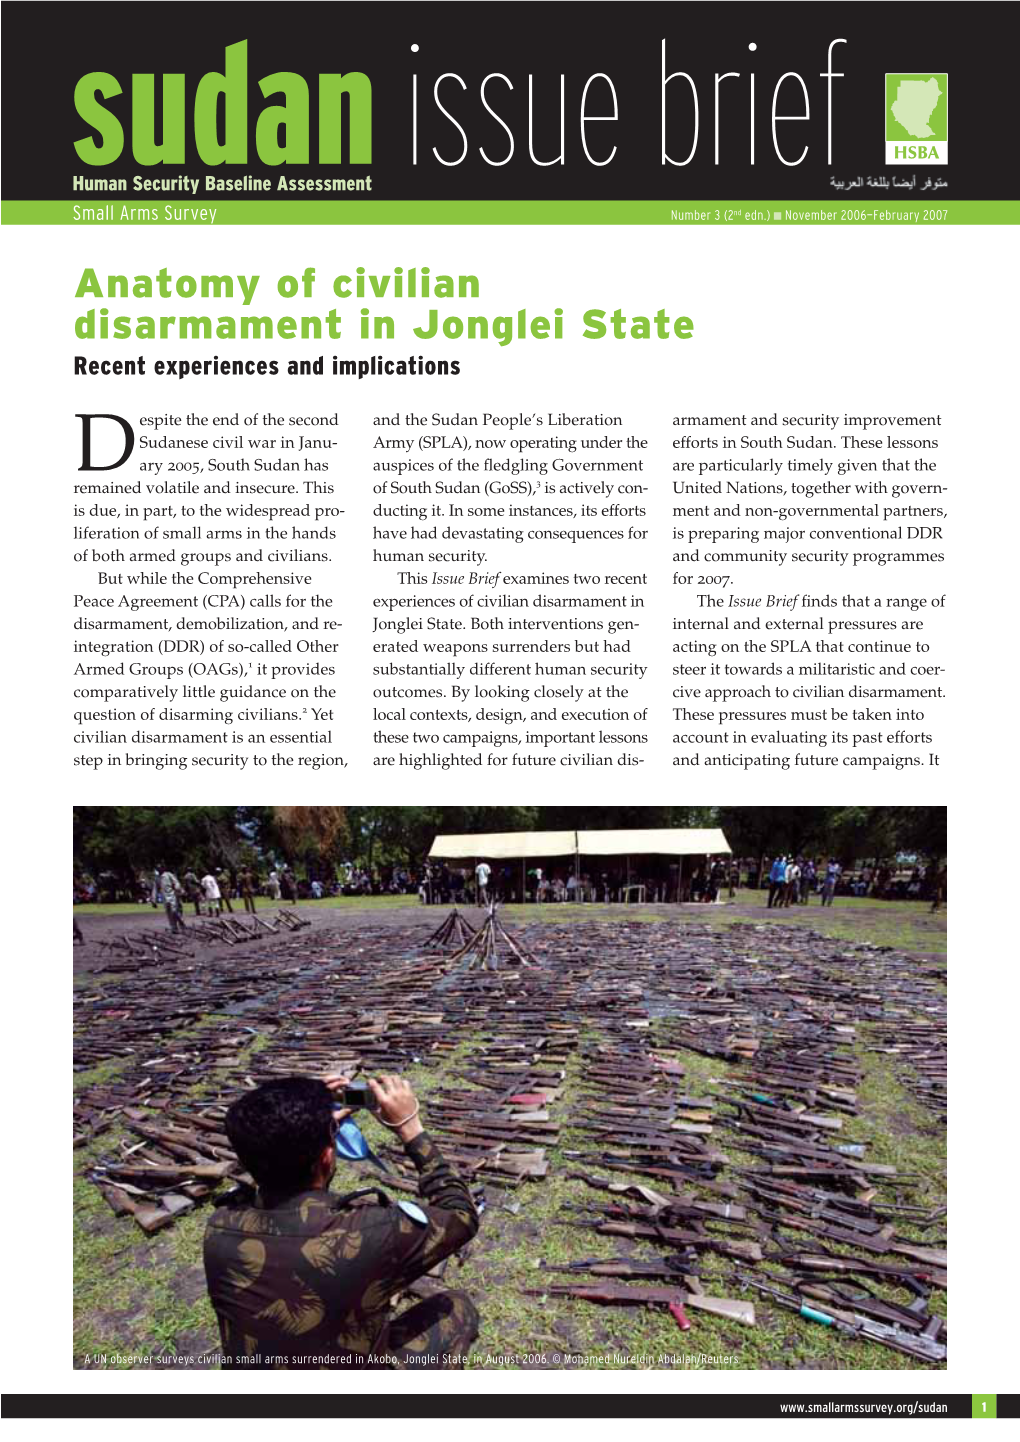 Anatomy of Civilian Disarmament in Jonglei State Recent Experiences and Implications